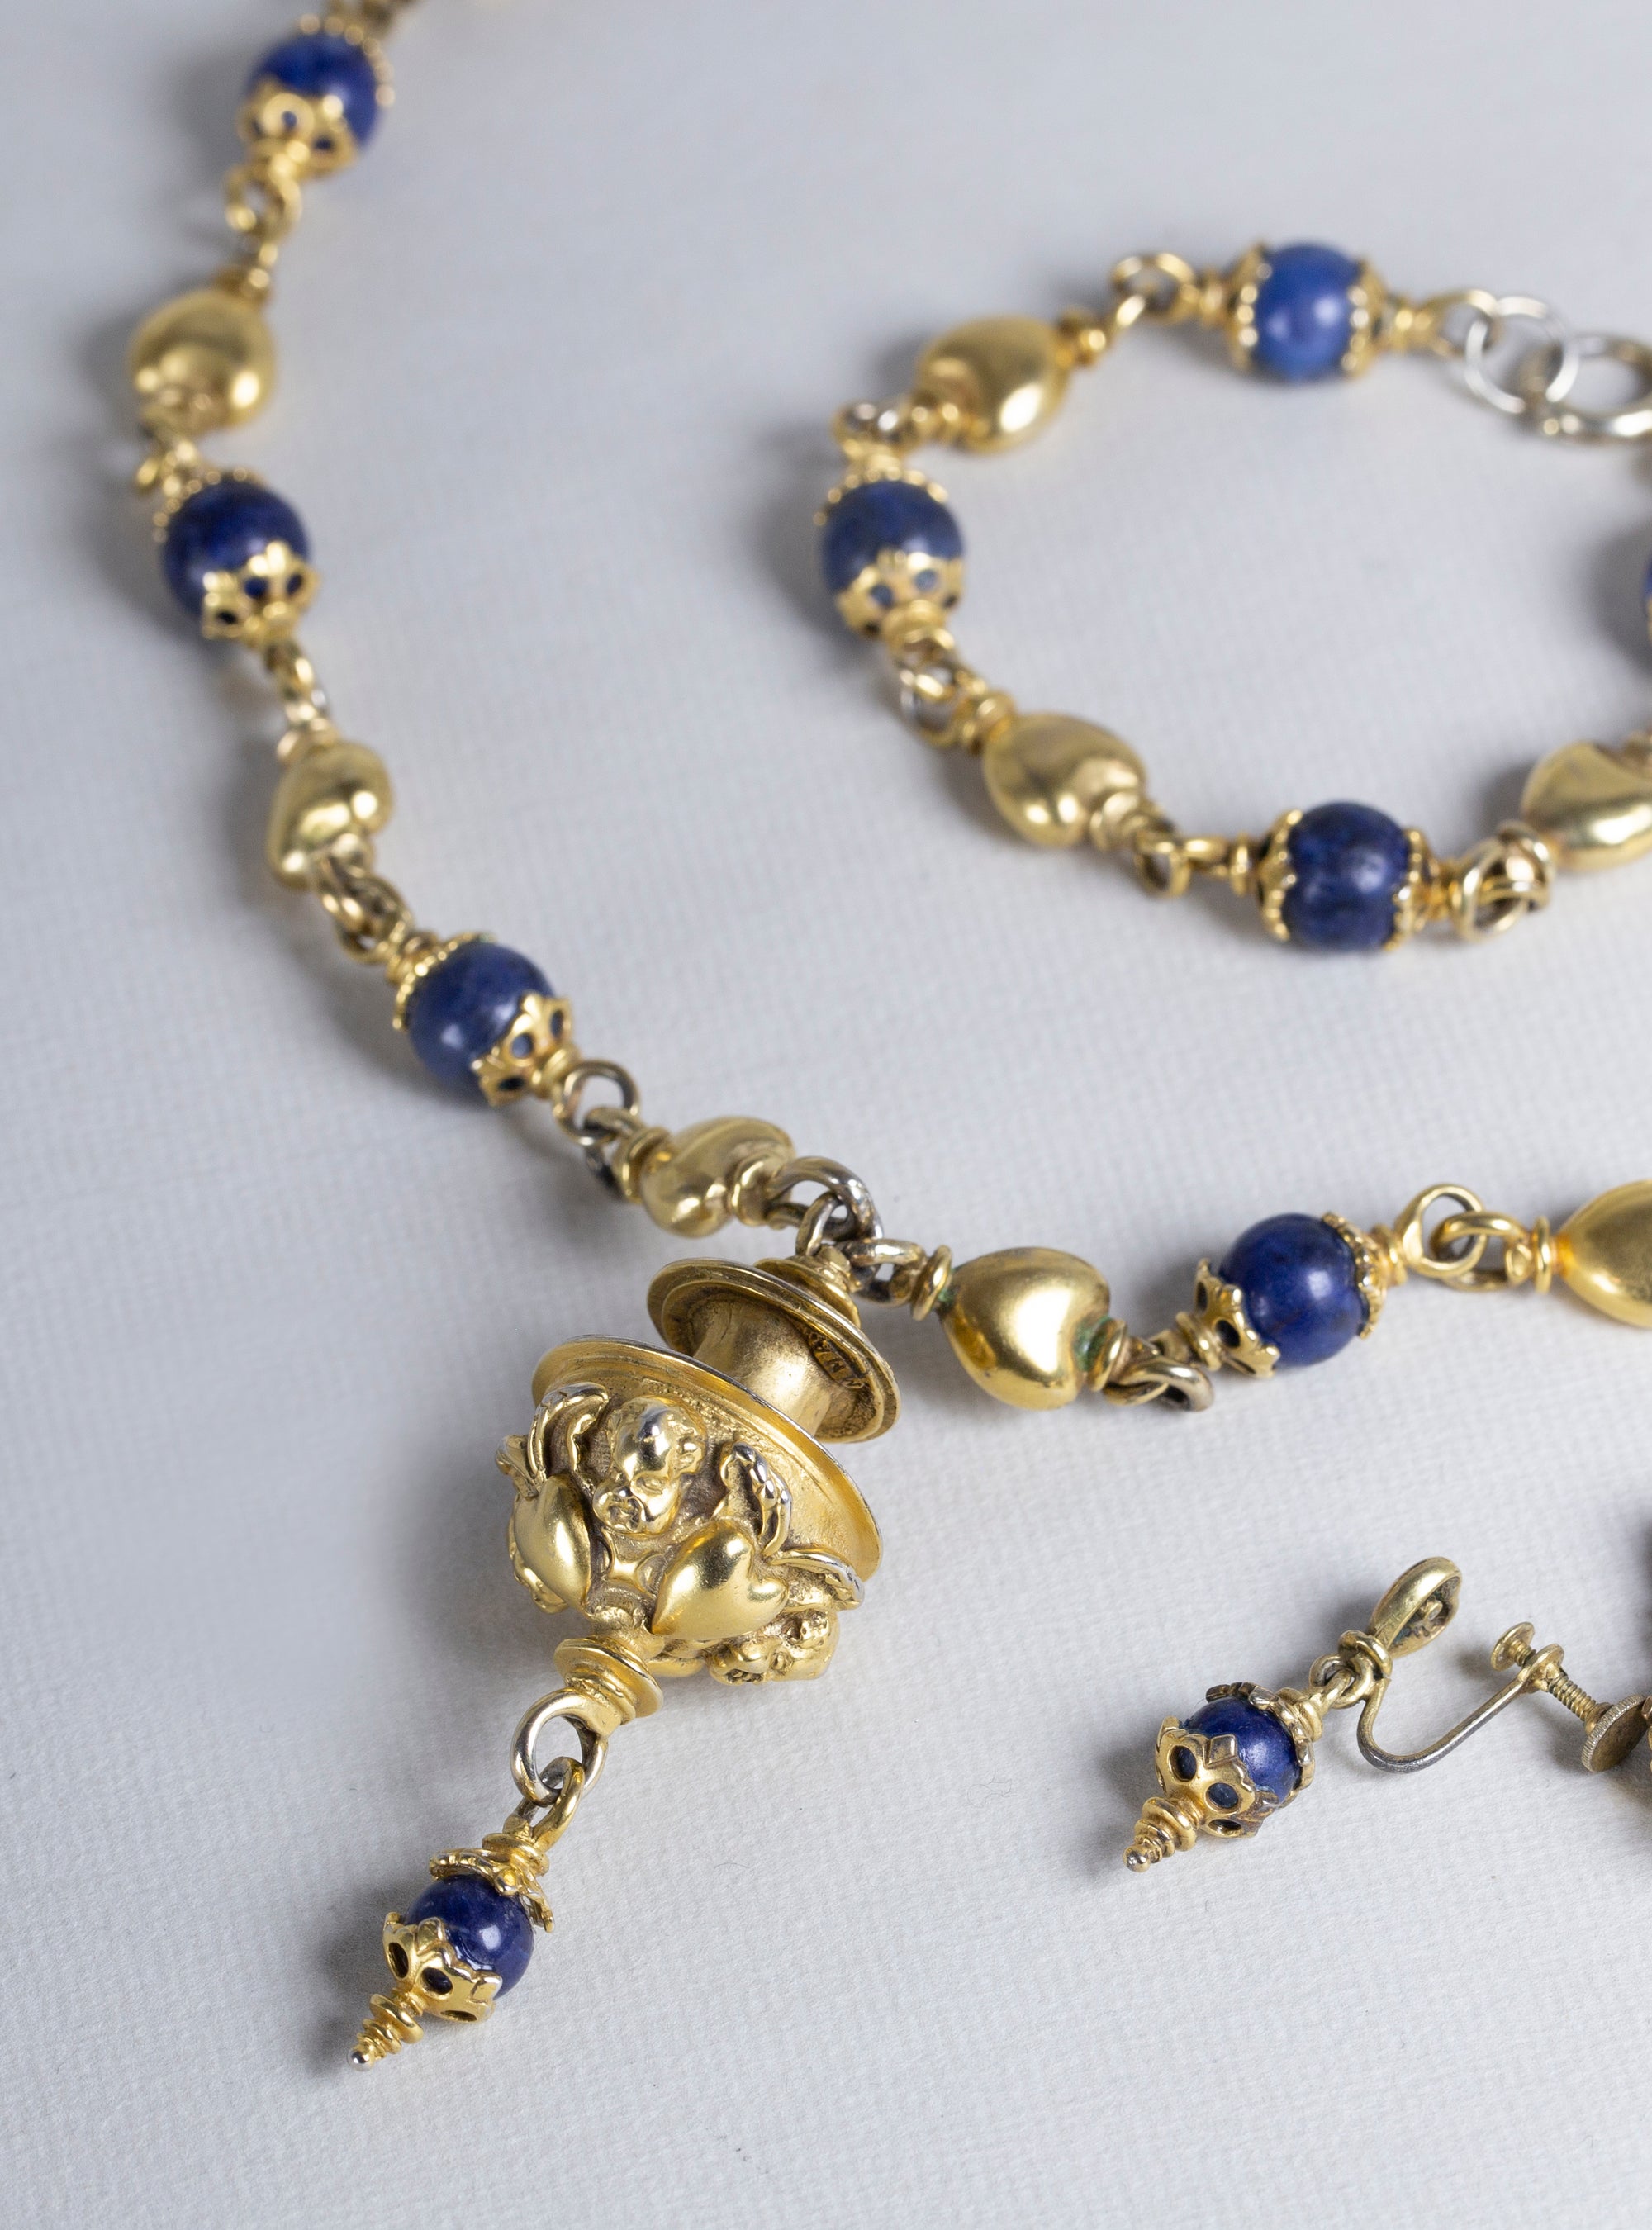 Complete Set of Vintage Costume Gold Necklace, Bracelet and Earrings with Lapis